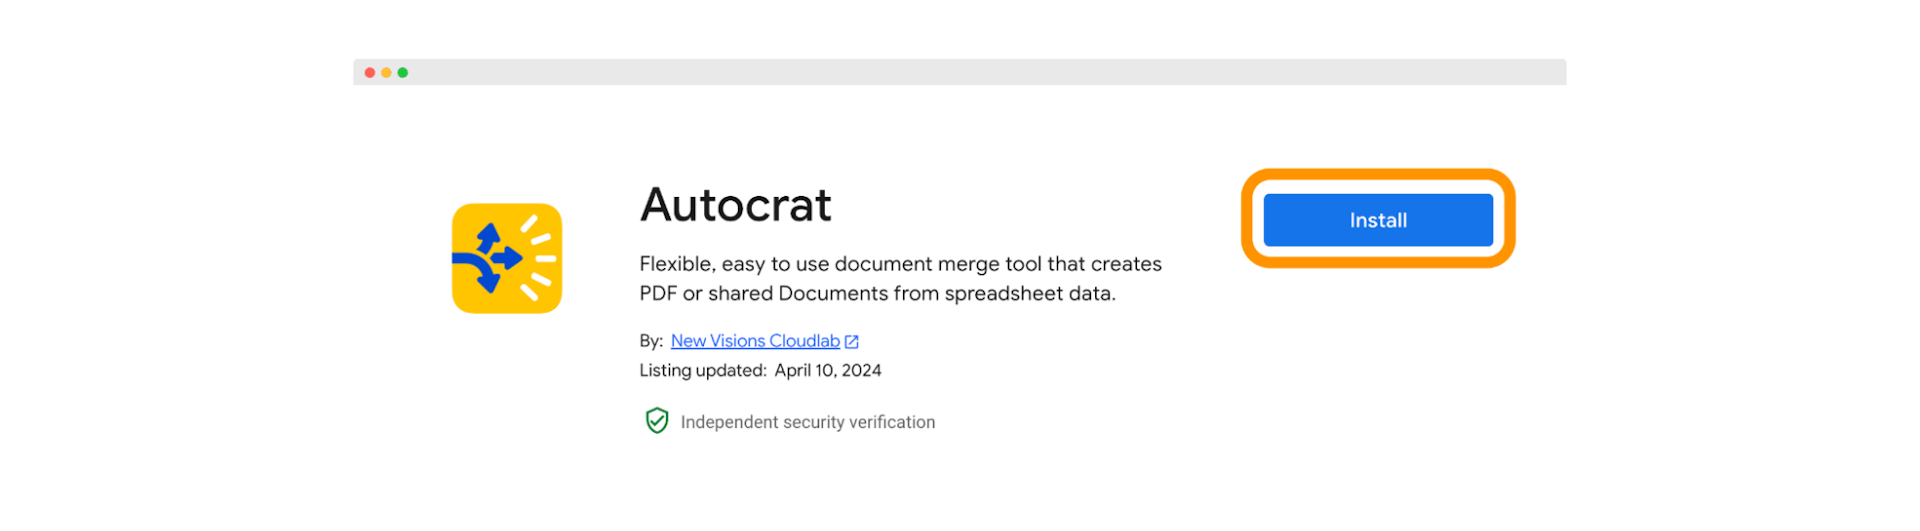 Autocrat for automating certificate sending via email and Google tools.